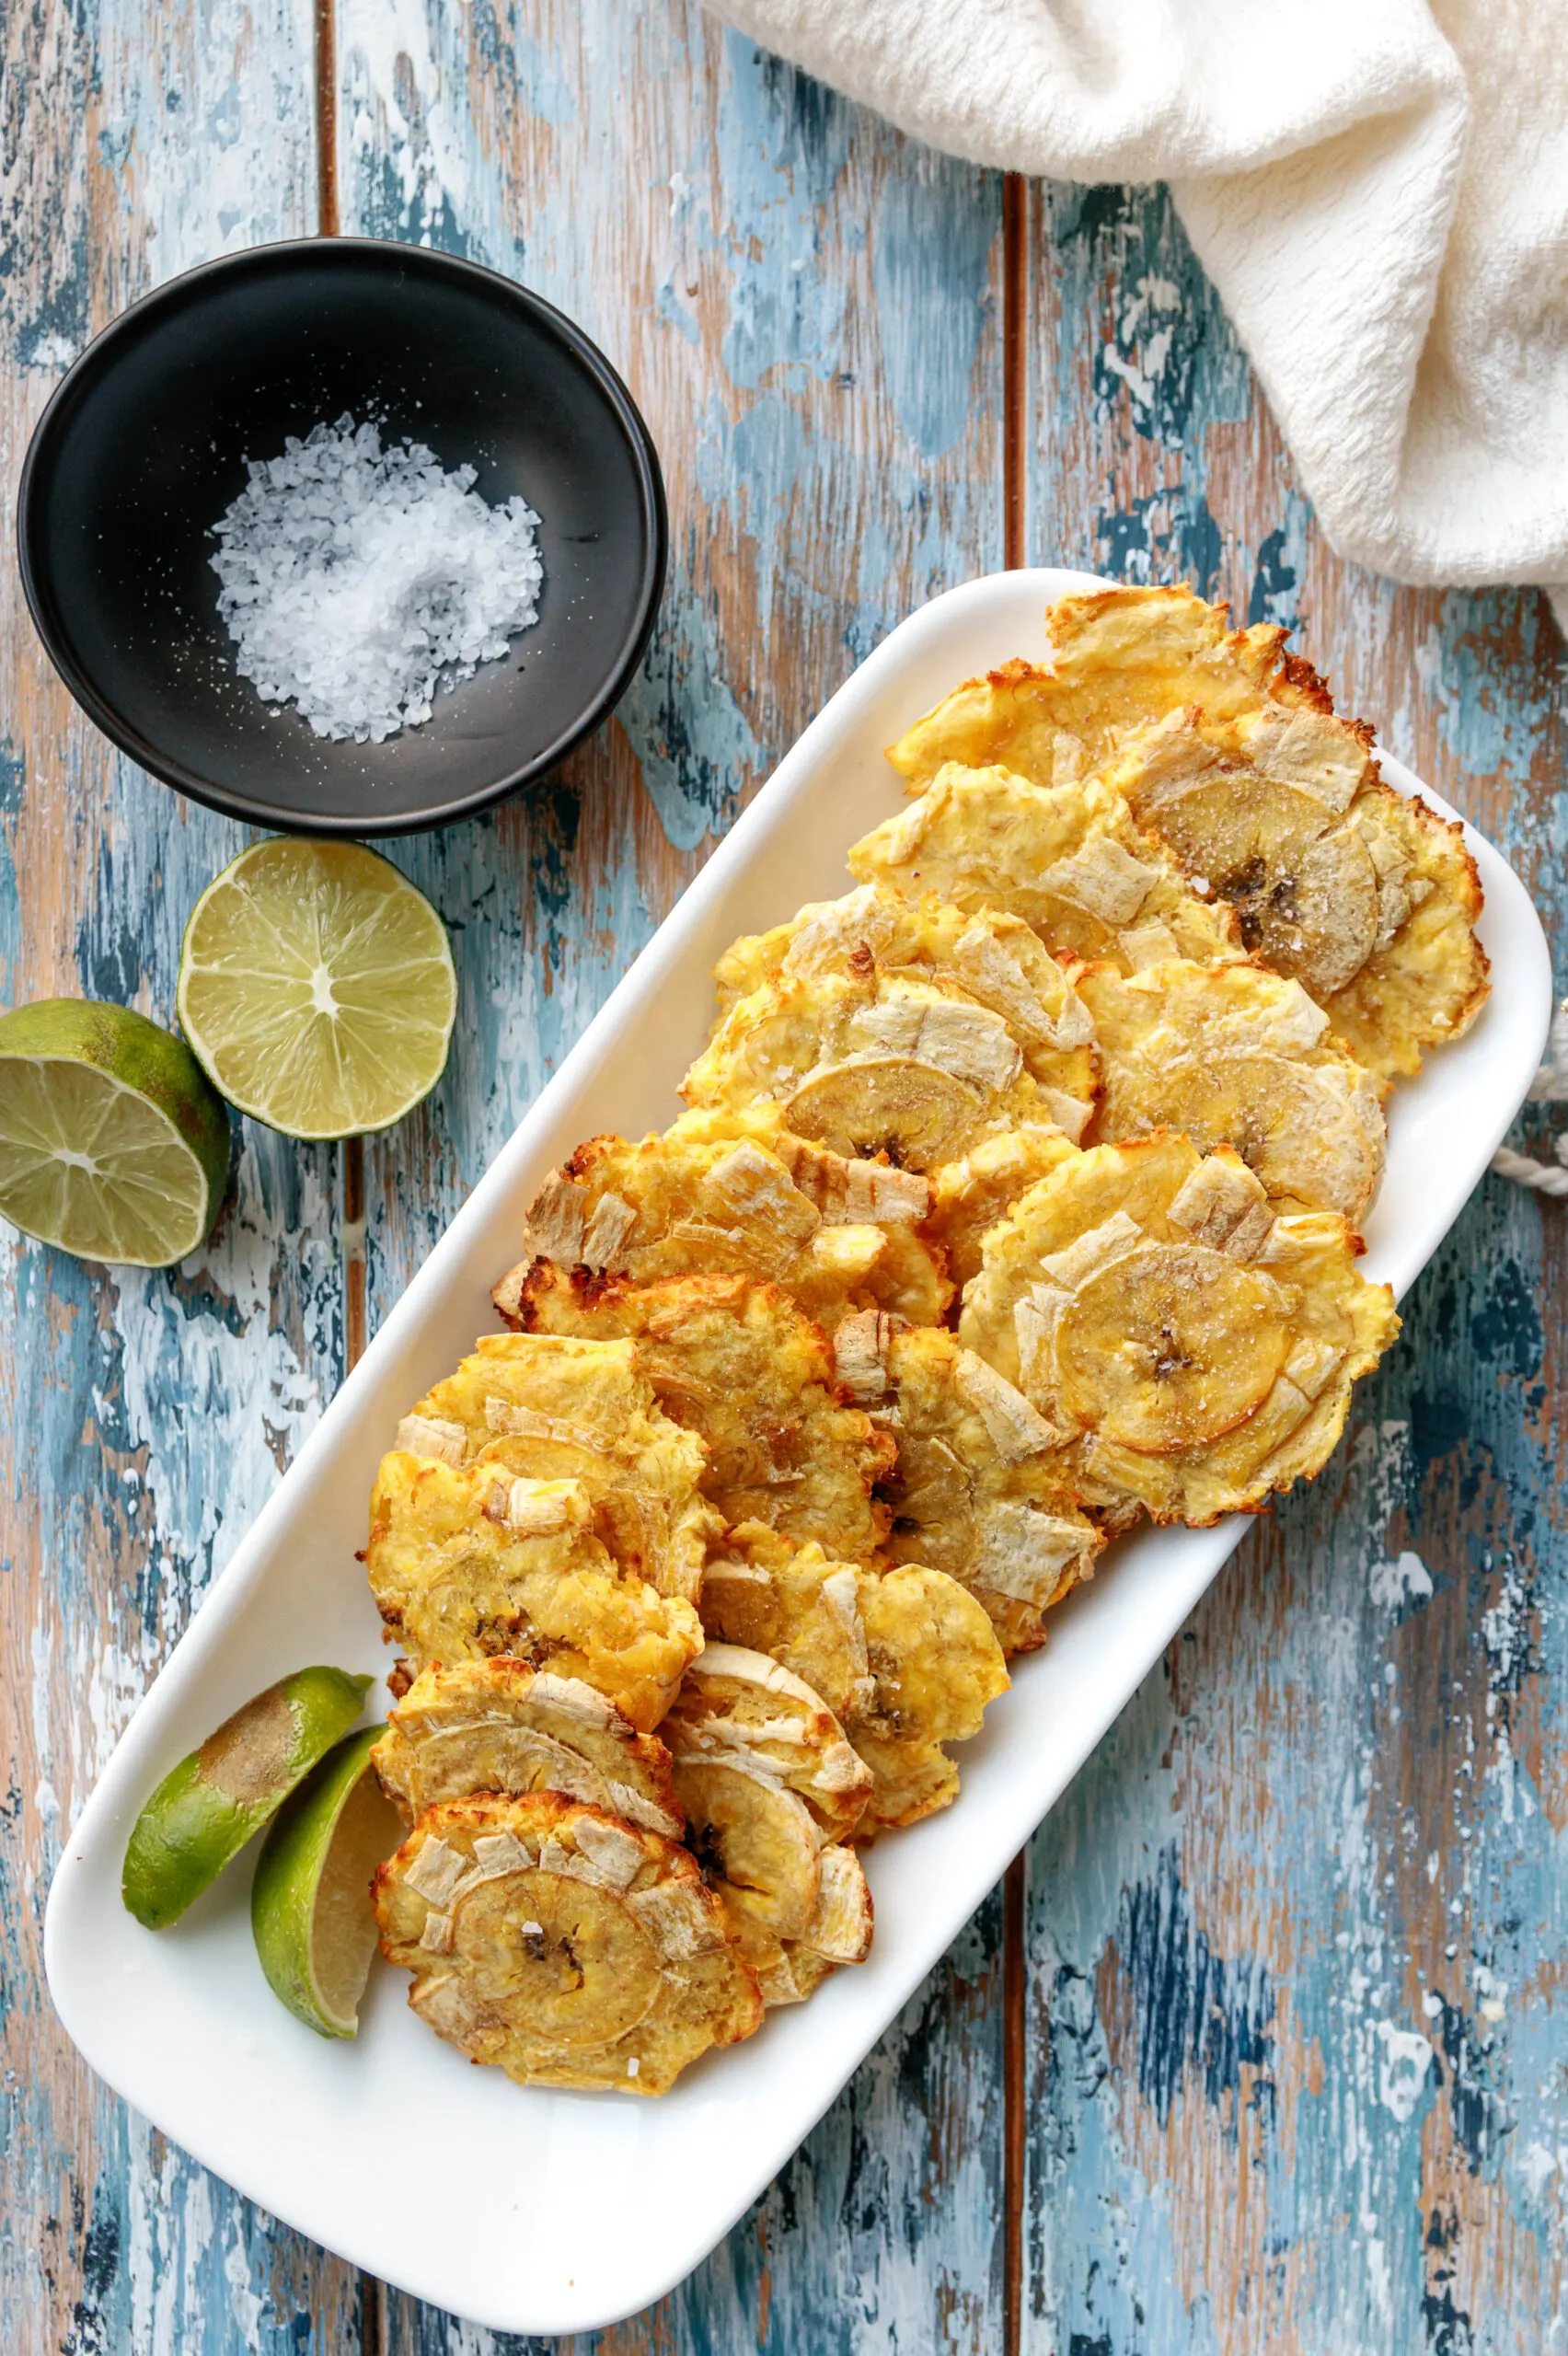 top view of the tostones on a mottled blue background with a dish of salt and cut lime as garnishes